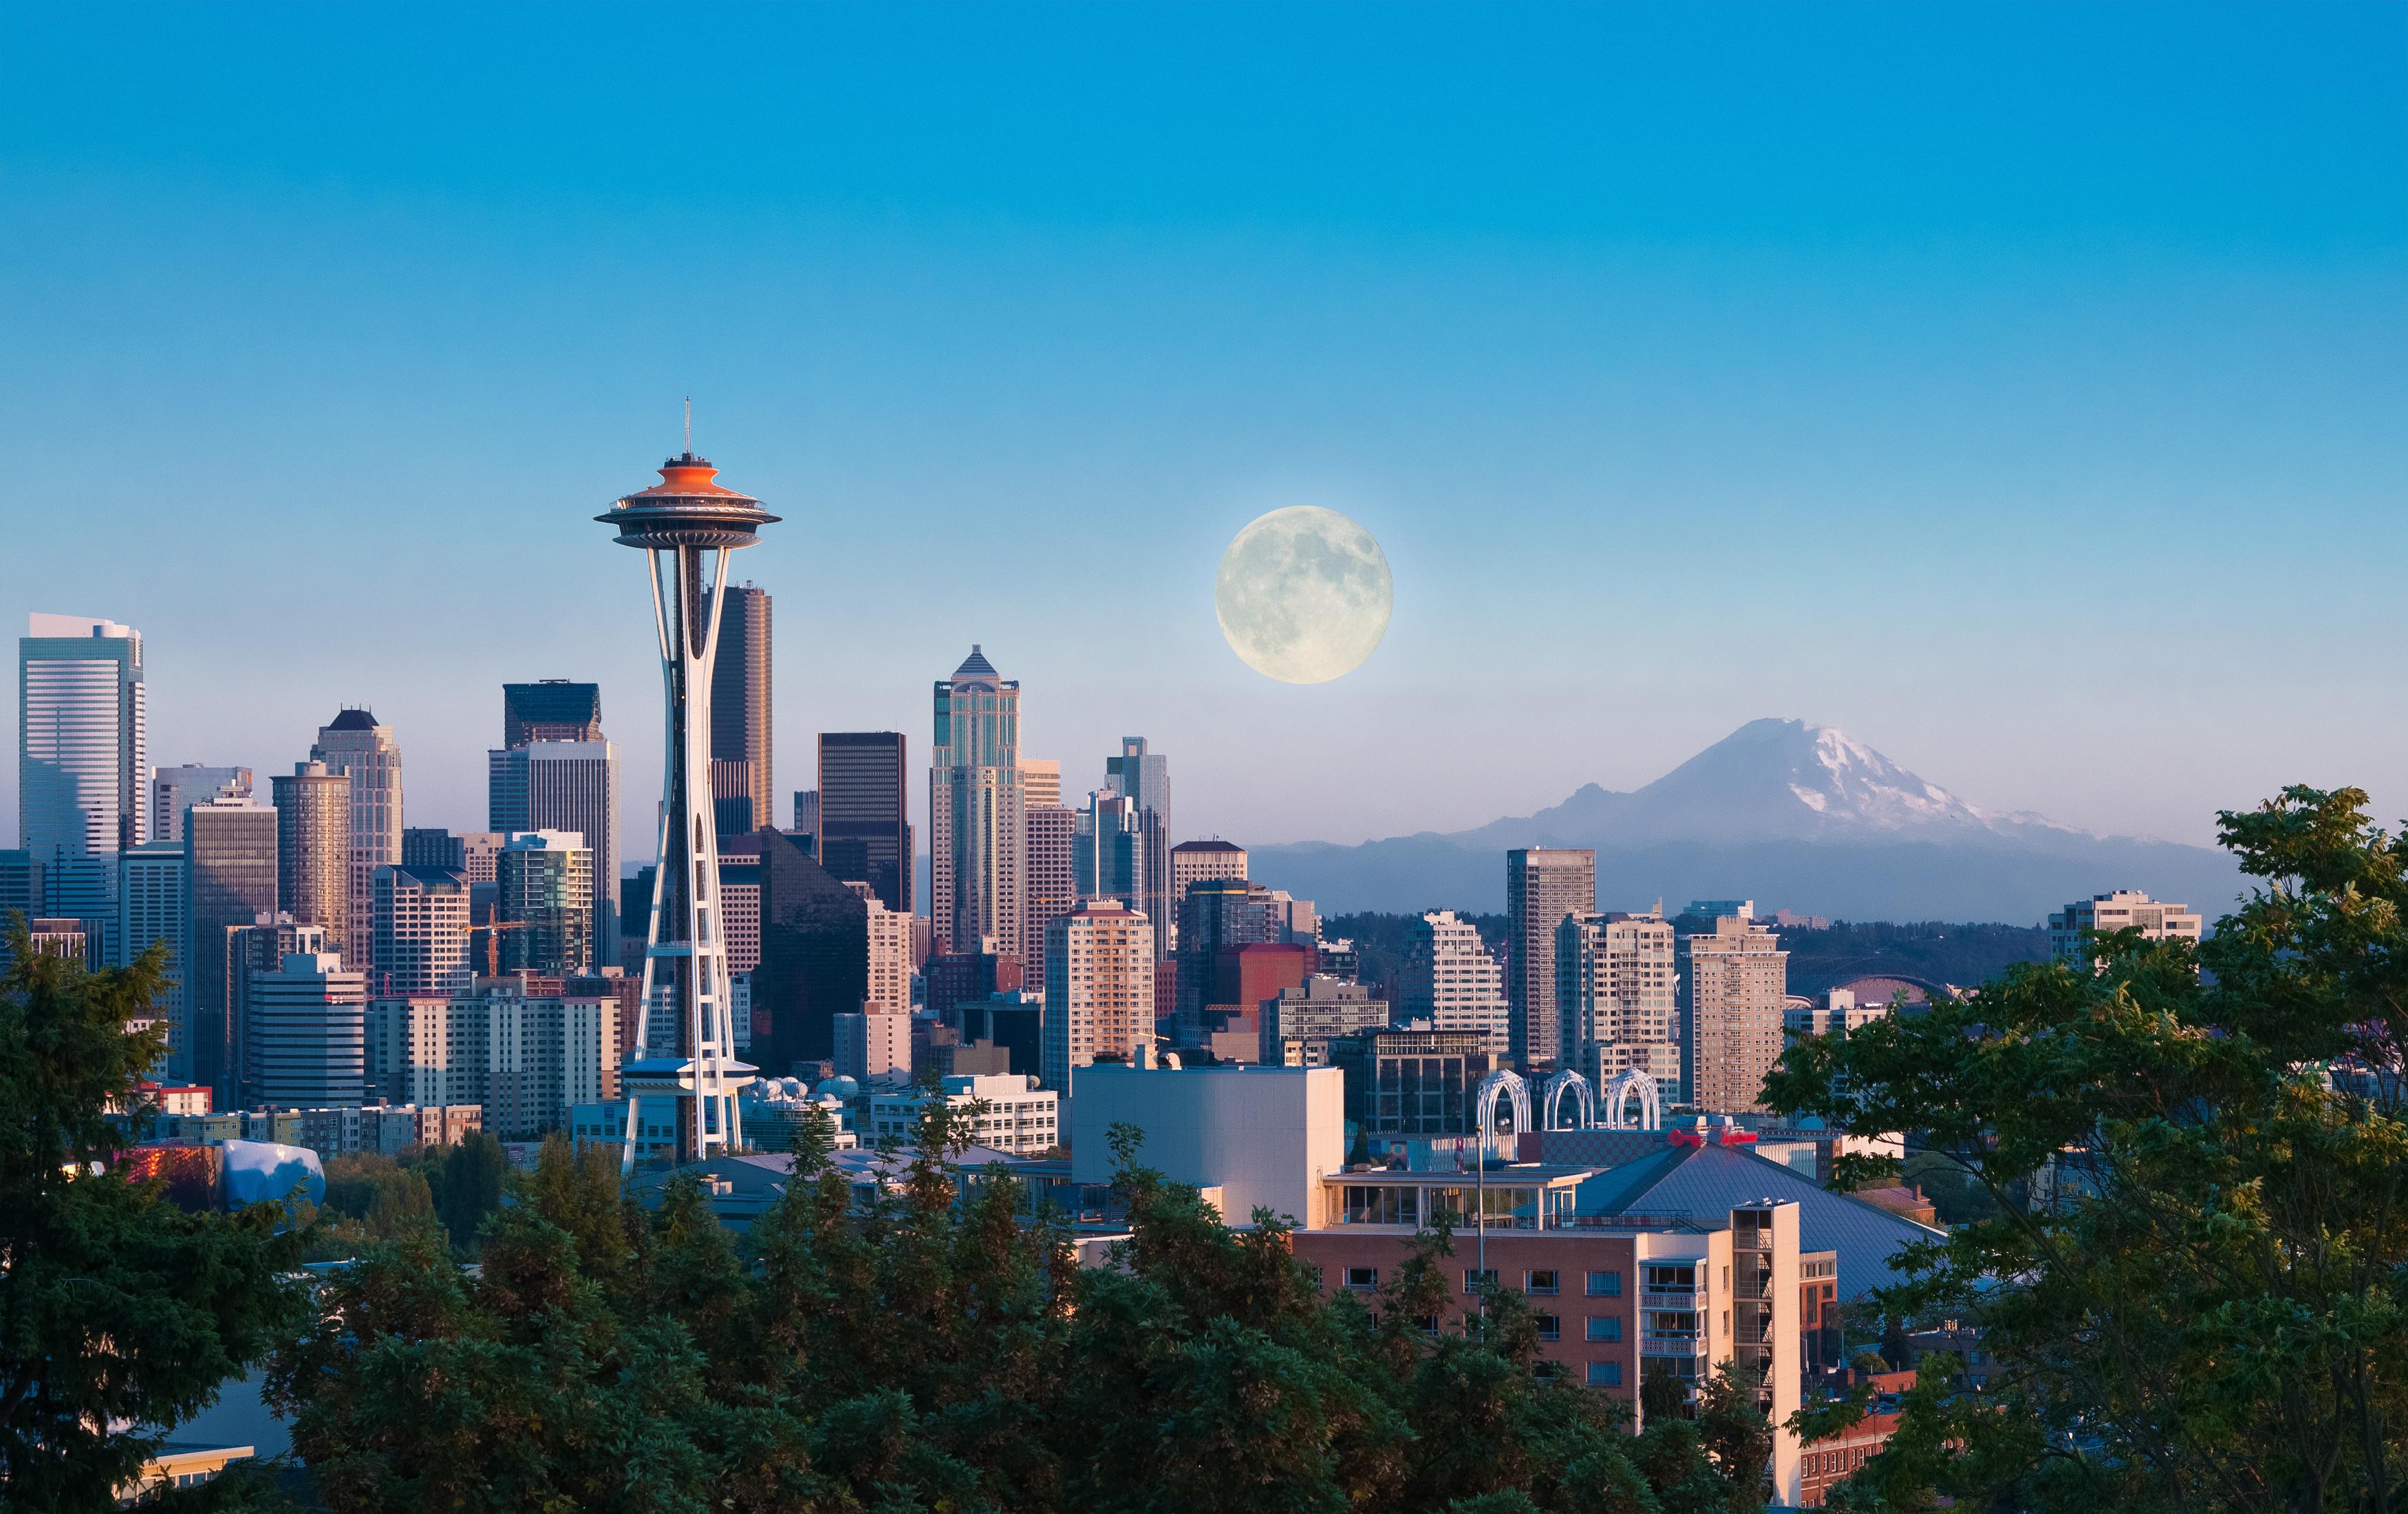 The Seattle city, cover photo